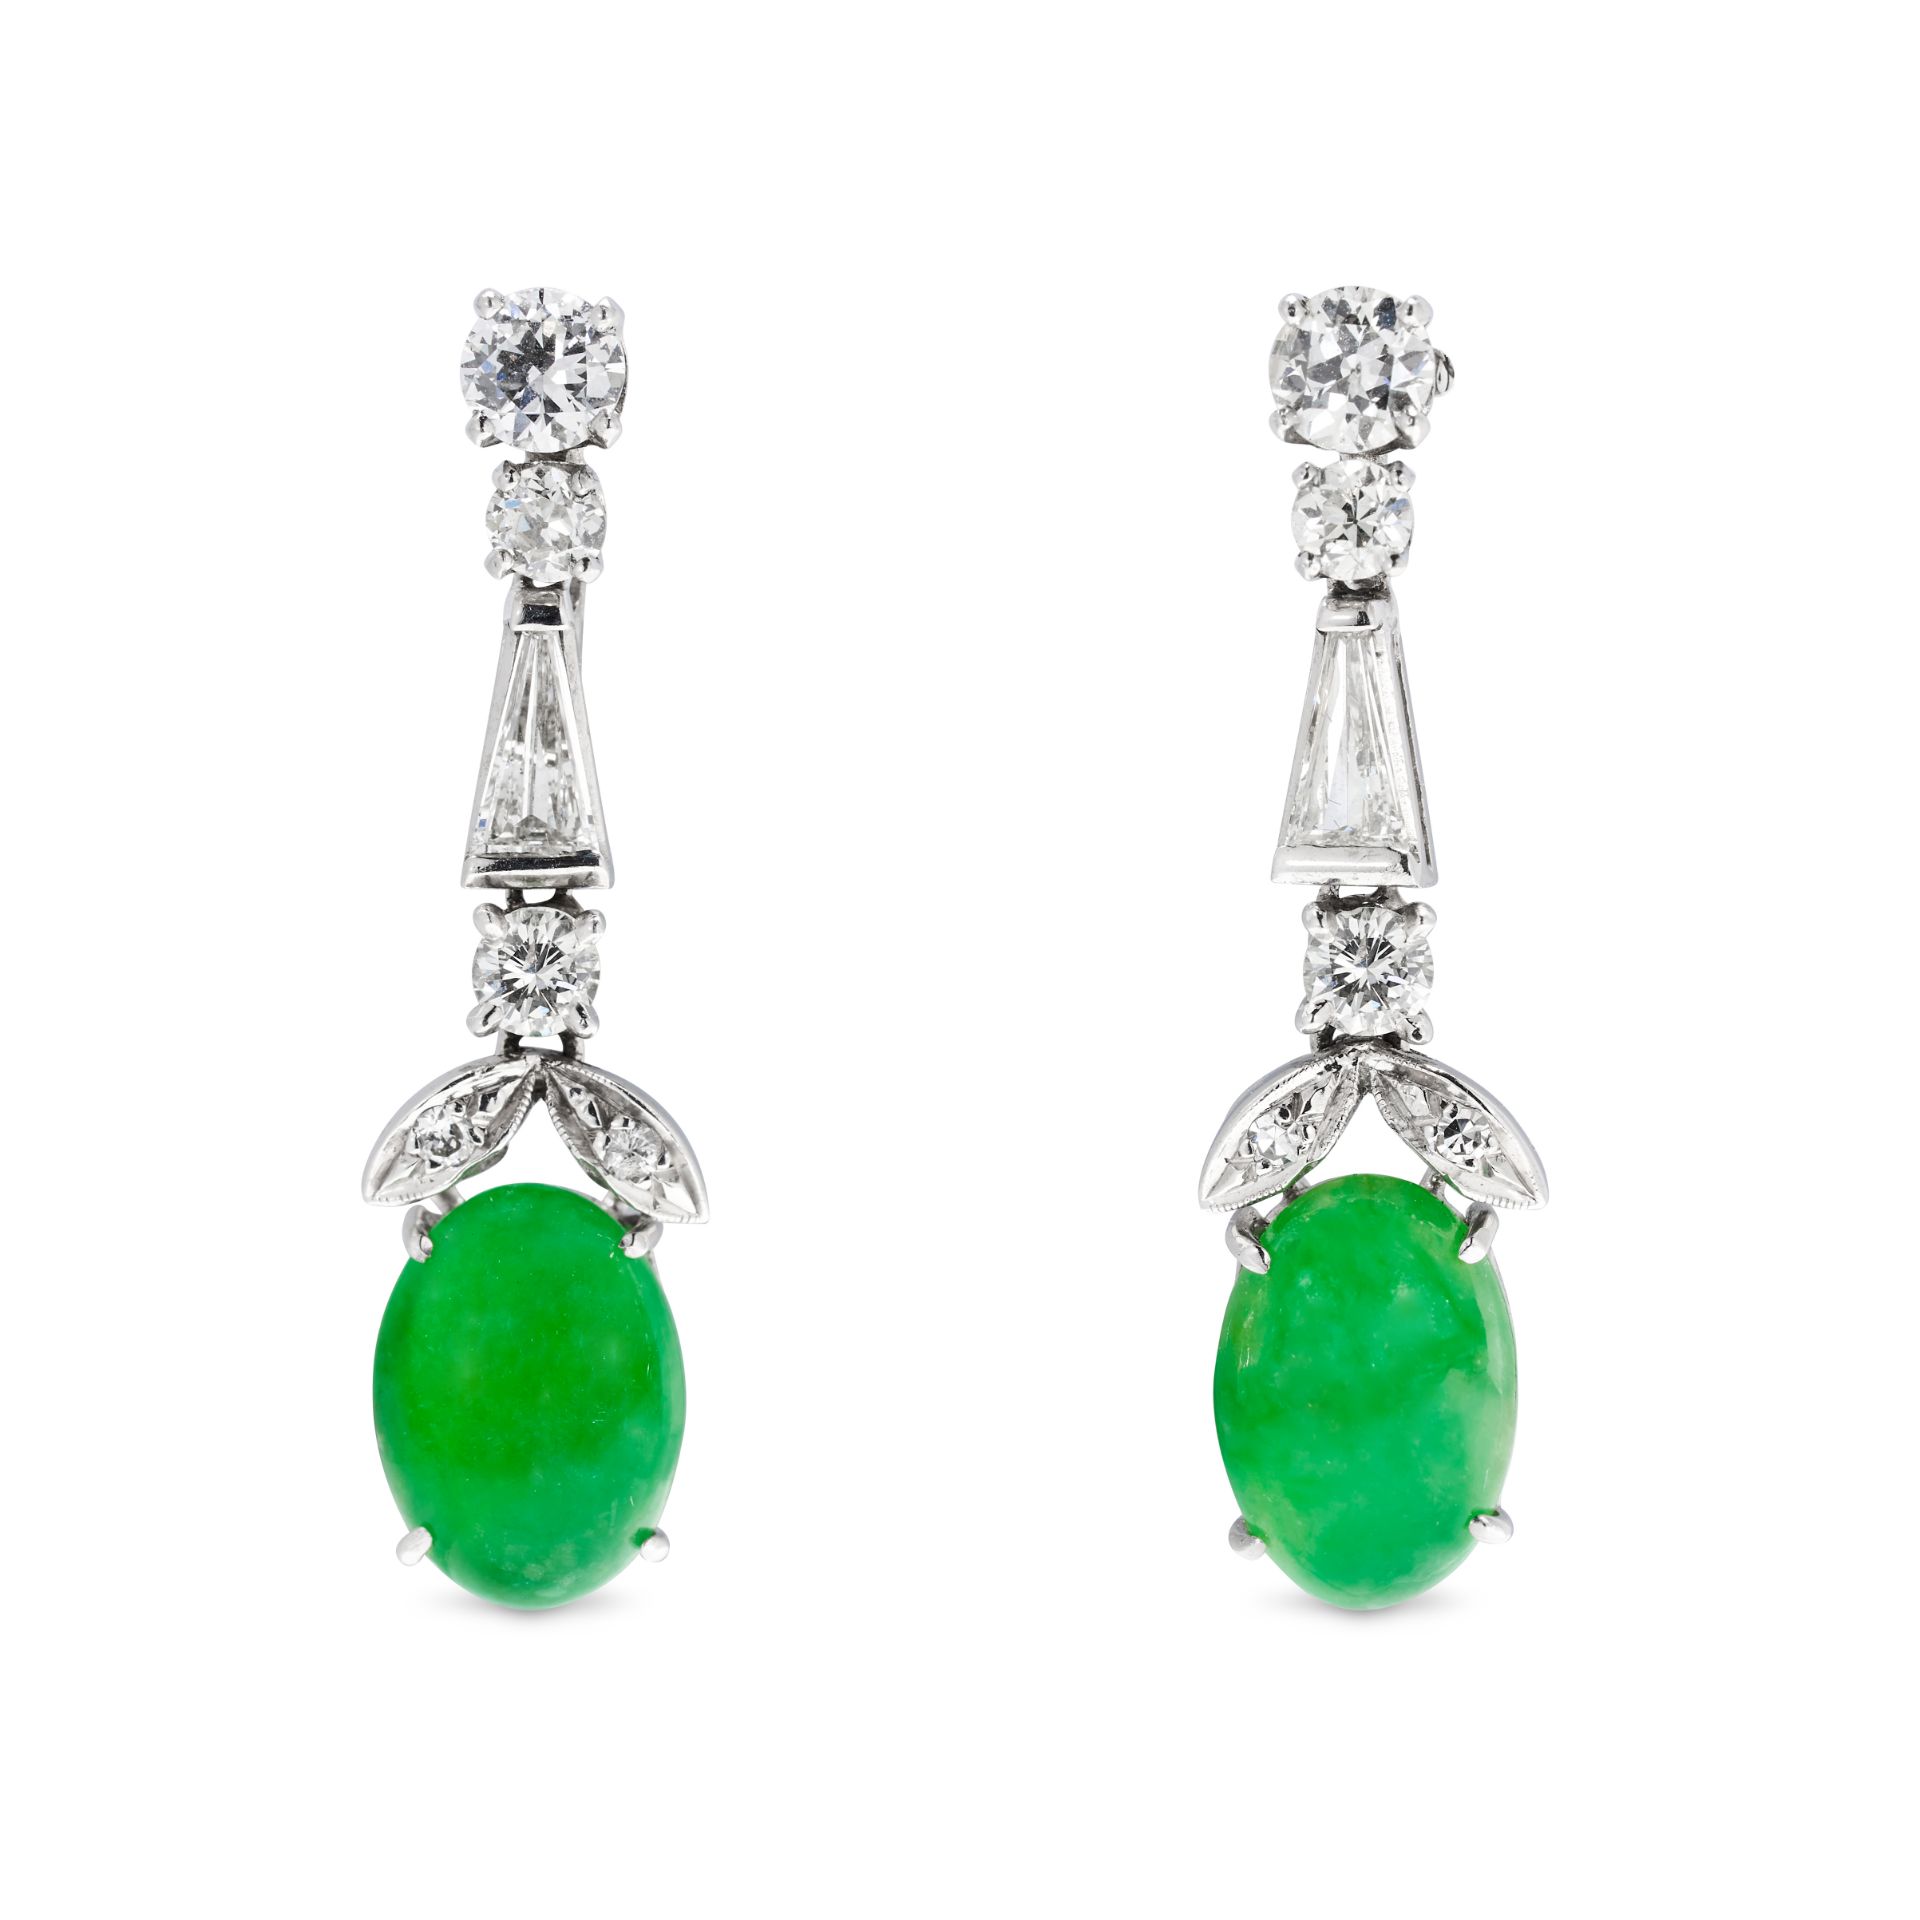 A PAIR OF NATURAL UNTREATED JADEITE JADE AND DIAMOND DROP EARRINGS in 14ct white gold, each compr...